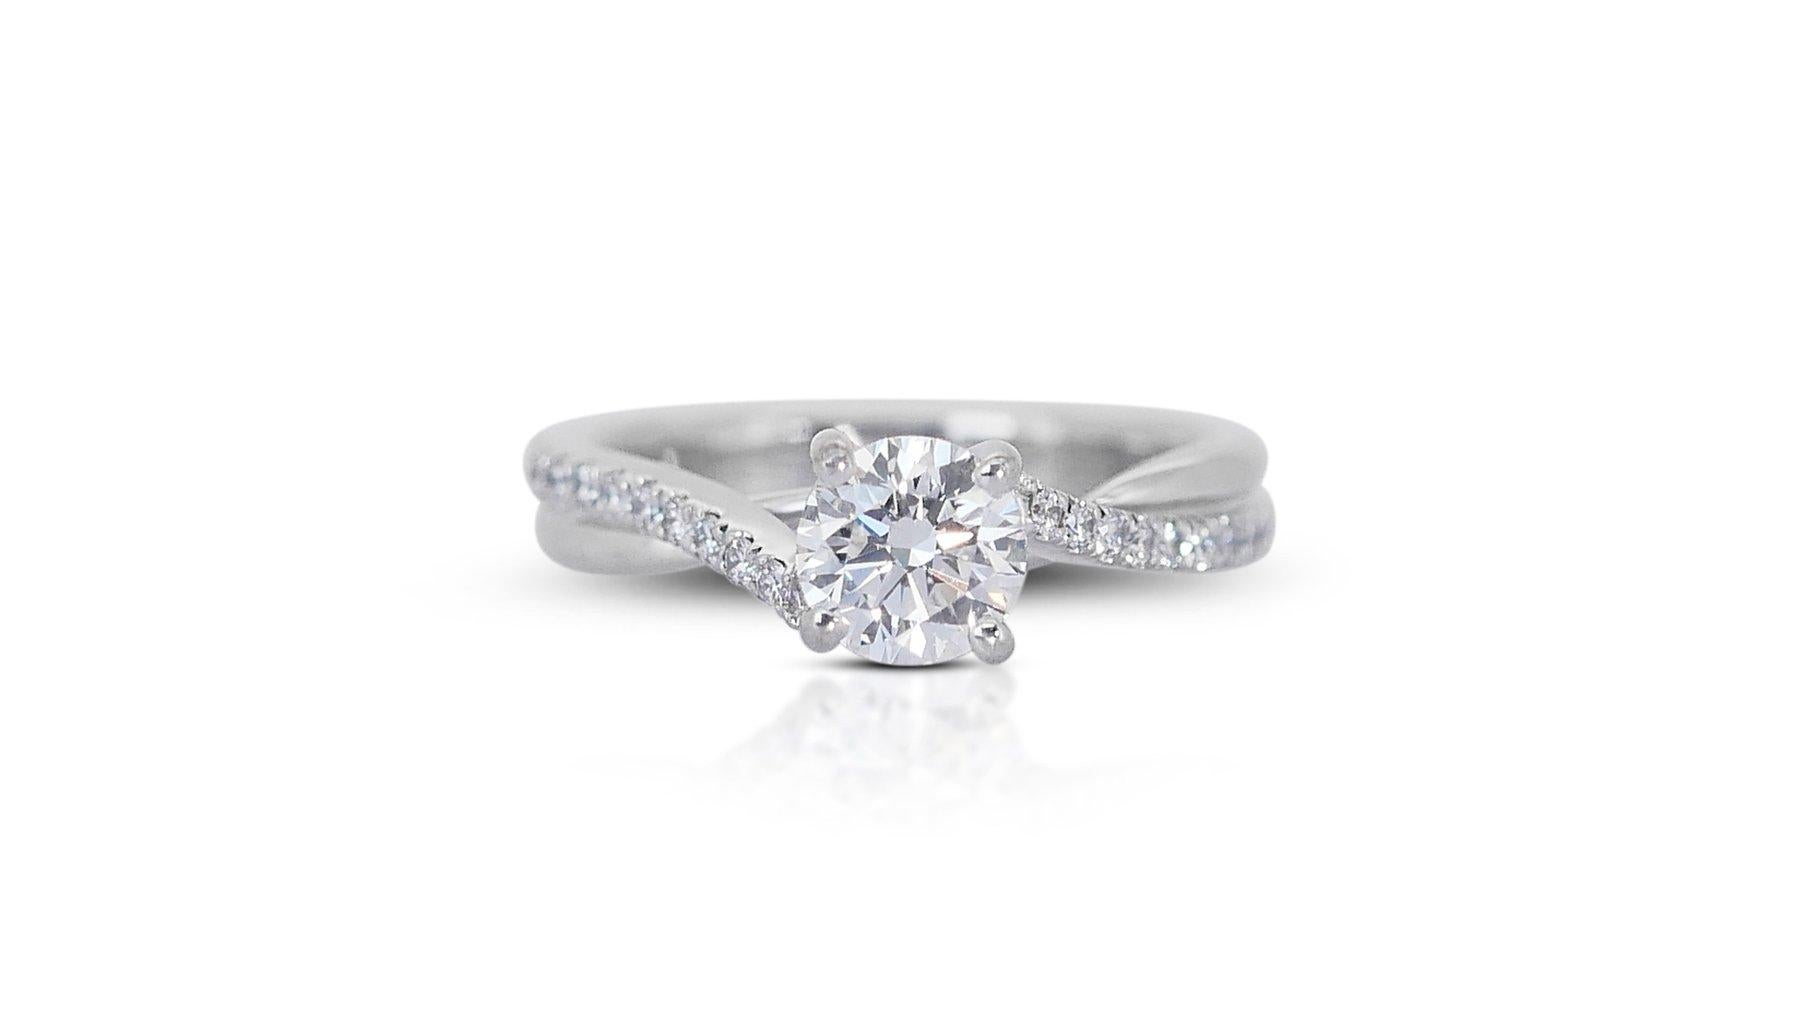 Elegant 18k White Gold Natural Diamond Pave Ring w/1.24 ct - GIA Certified

This breathtaking diamond pave ring showcases a captivating halo design, crafted in gleaming 18k white gold for a timeless and sophisticated look. Featuring a stunning 1.00